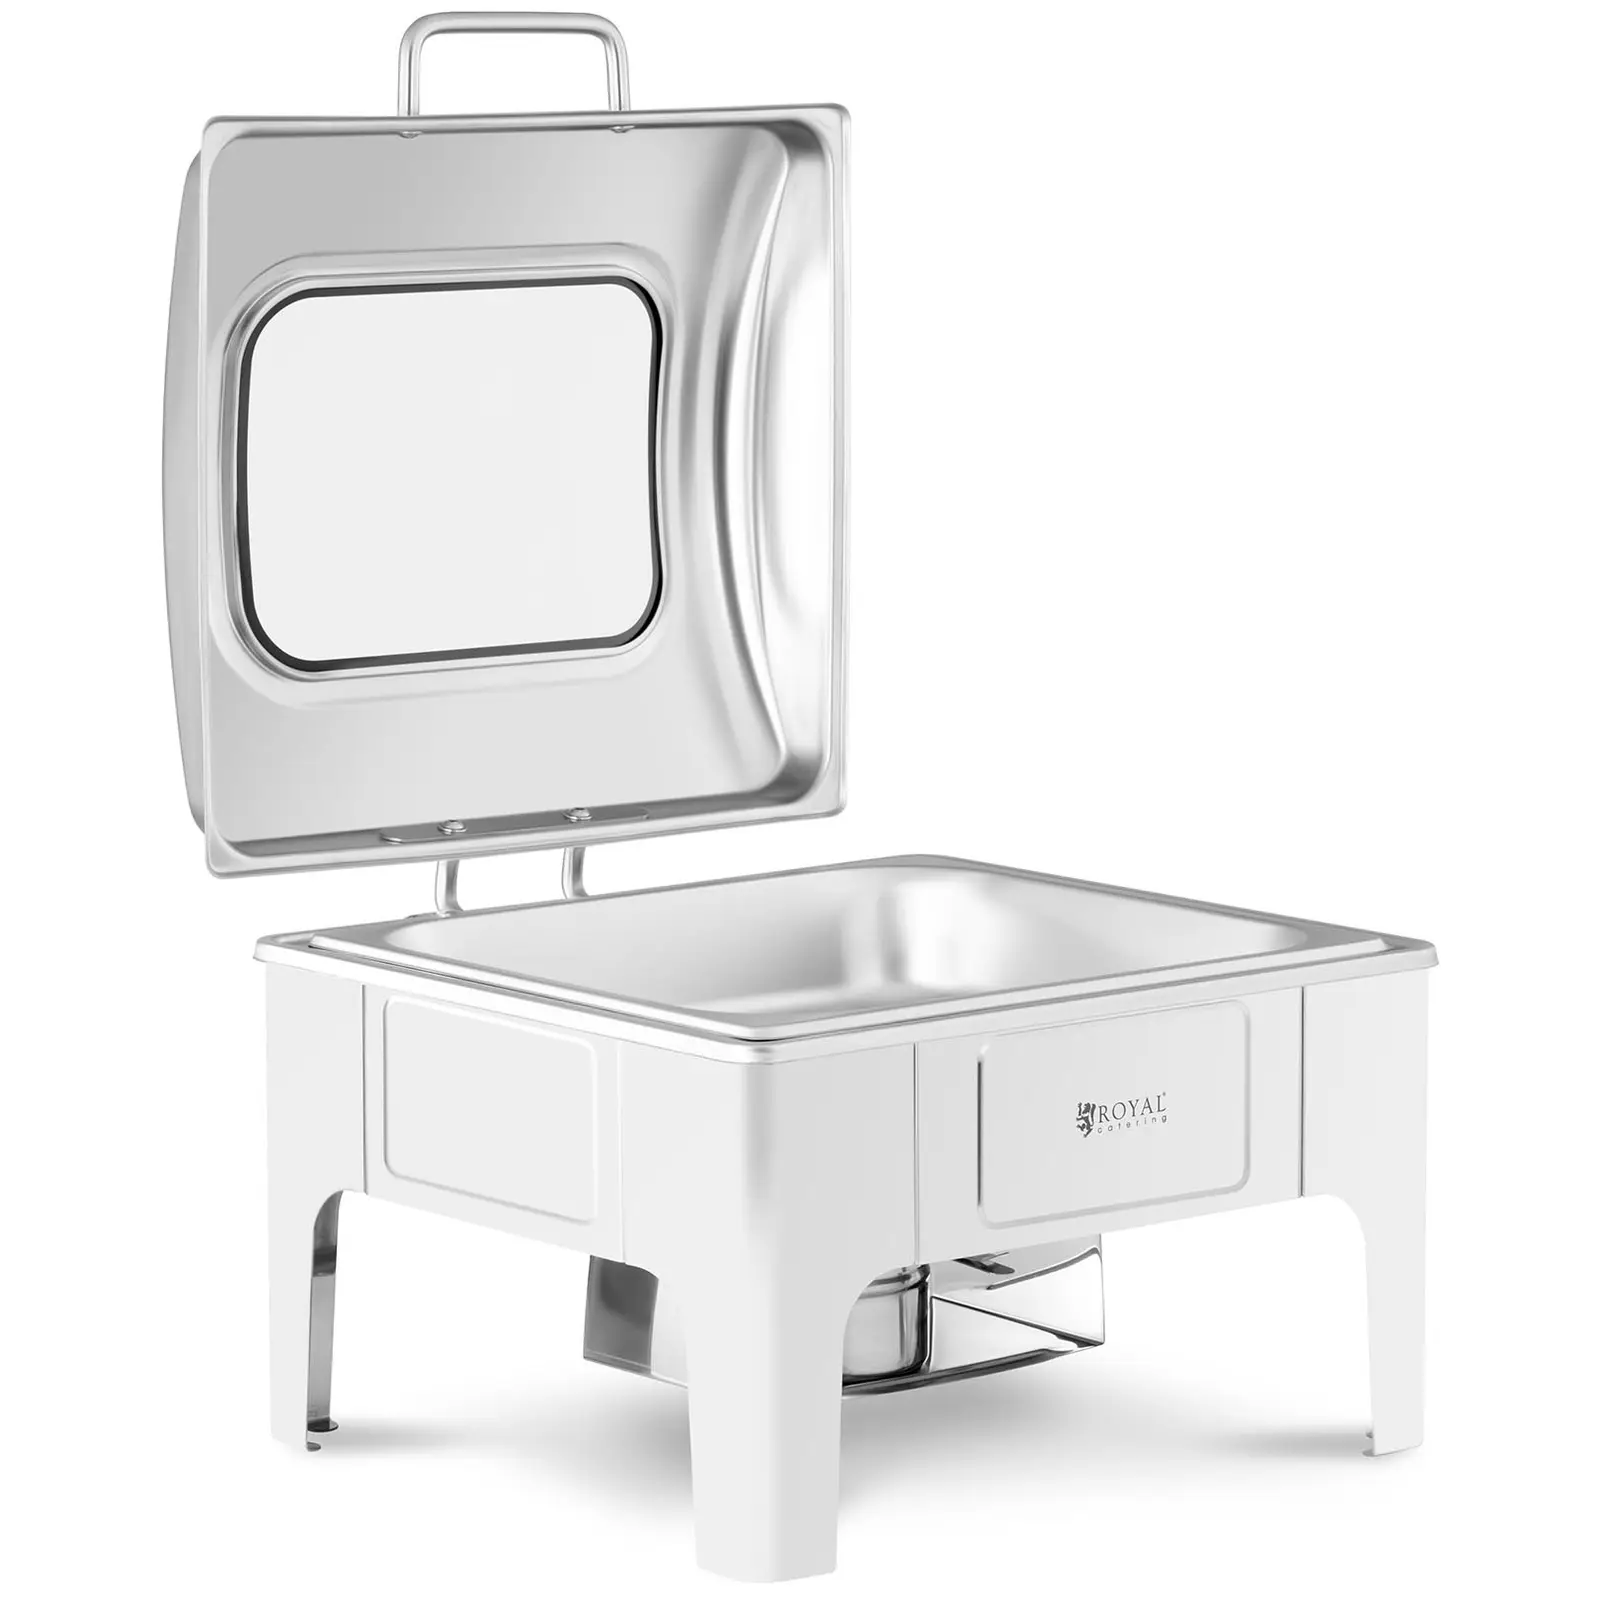 Chafing Dish - GN 2/3 - Royal Catering - 5,3 L - 1 contenedor de combustible - Ventana